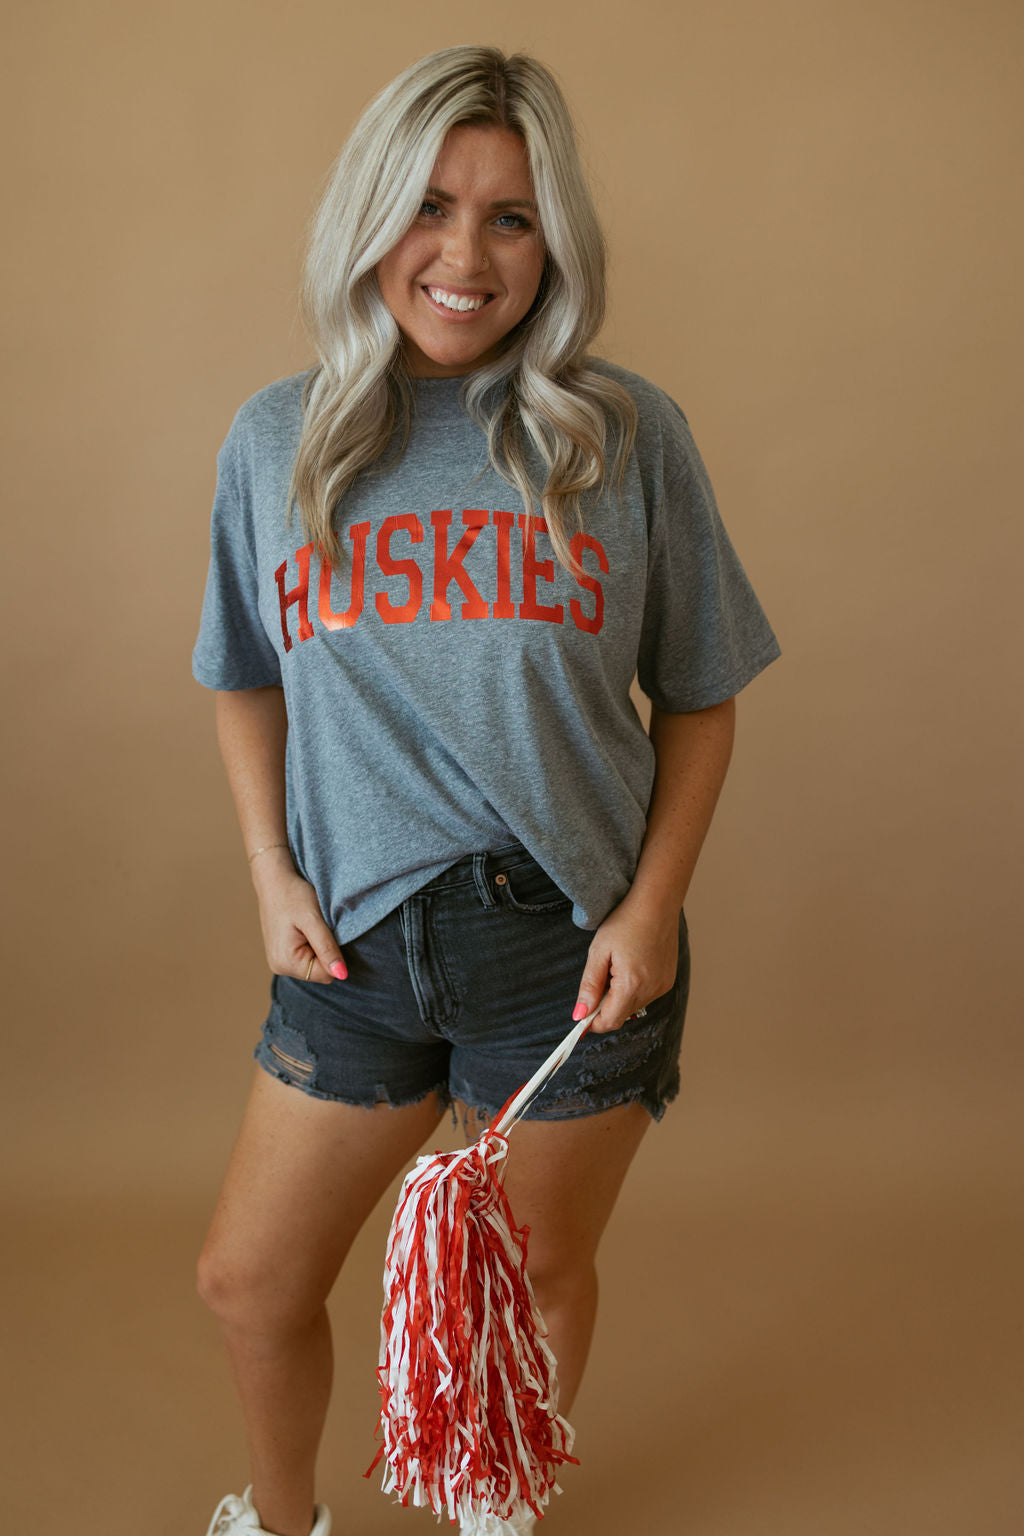 Huskies Foil | Mom Crop Tee-Adult Tee-Sister Shirts-Sister Shirts, Cute & Custom Tees for Mama & Littles in Trussville, Alabama.